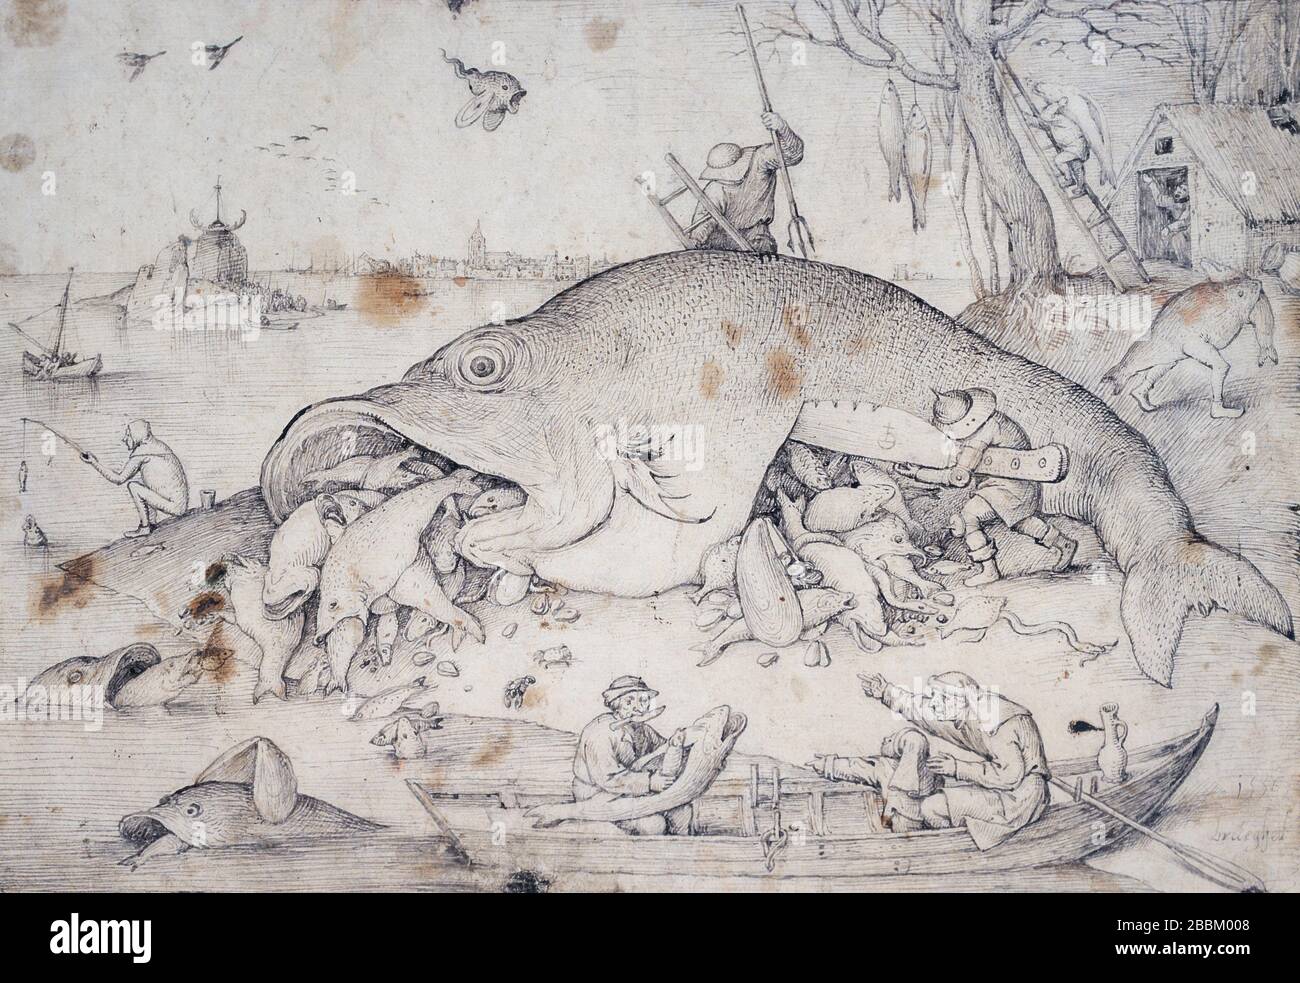 'The Big Fish Eat the Little Fish' (1556) by Pieter Bruegel the Elder (c.1526-1530 – 1559). Brush and pen. Facsimile. Stock Photo